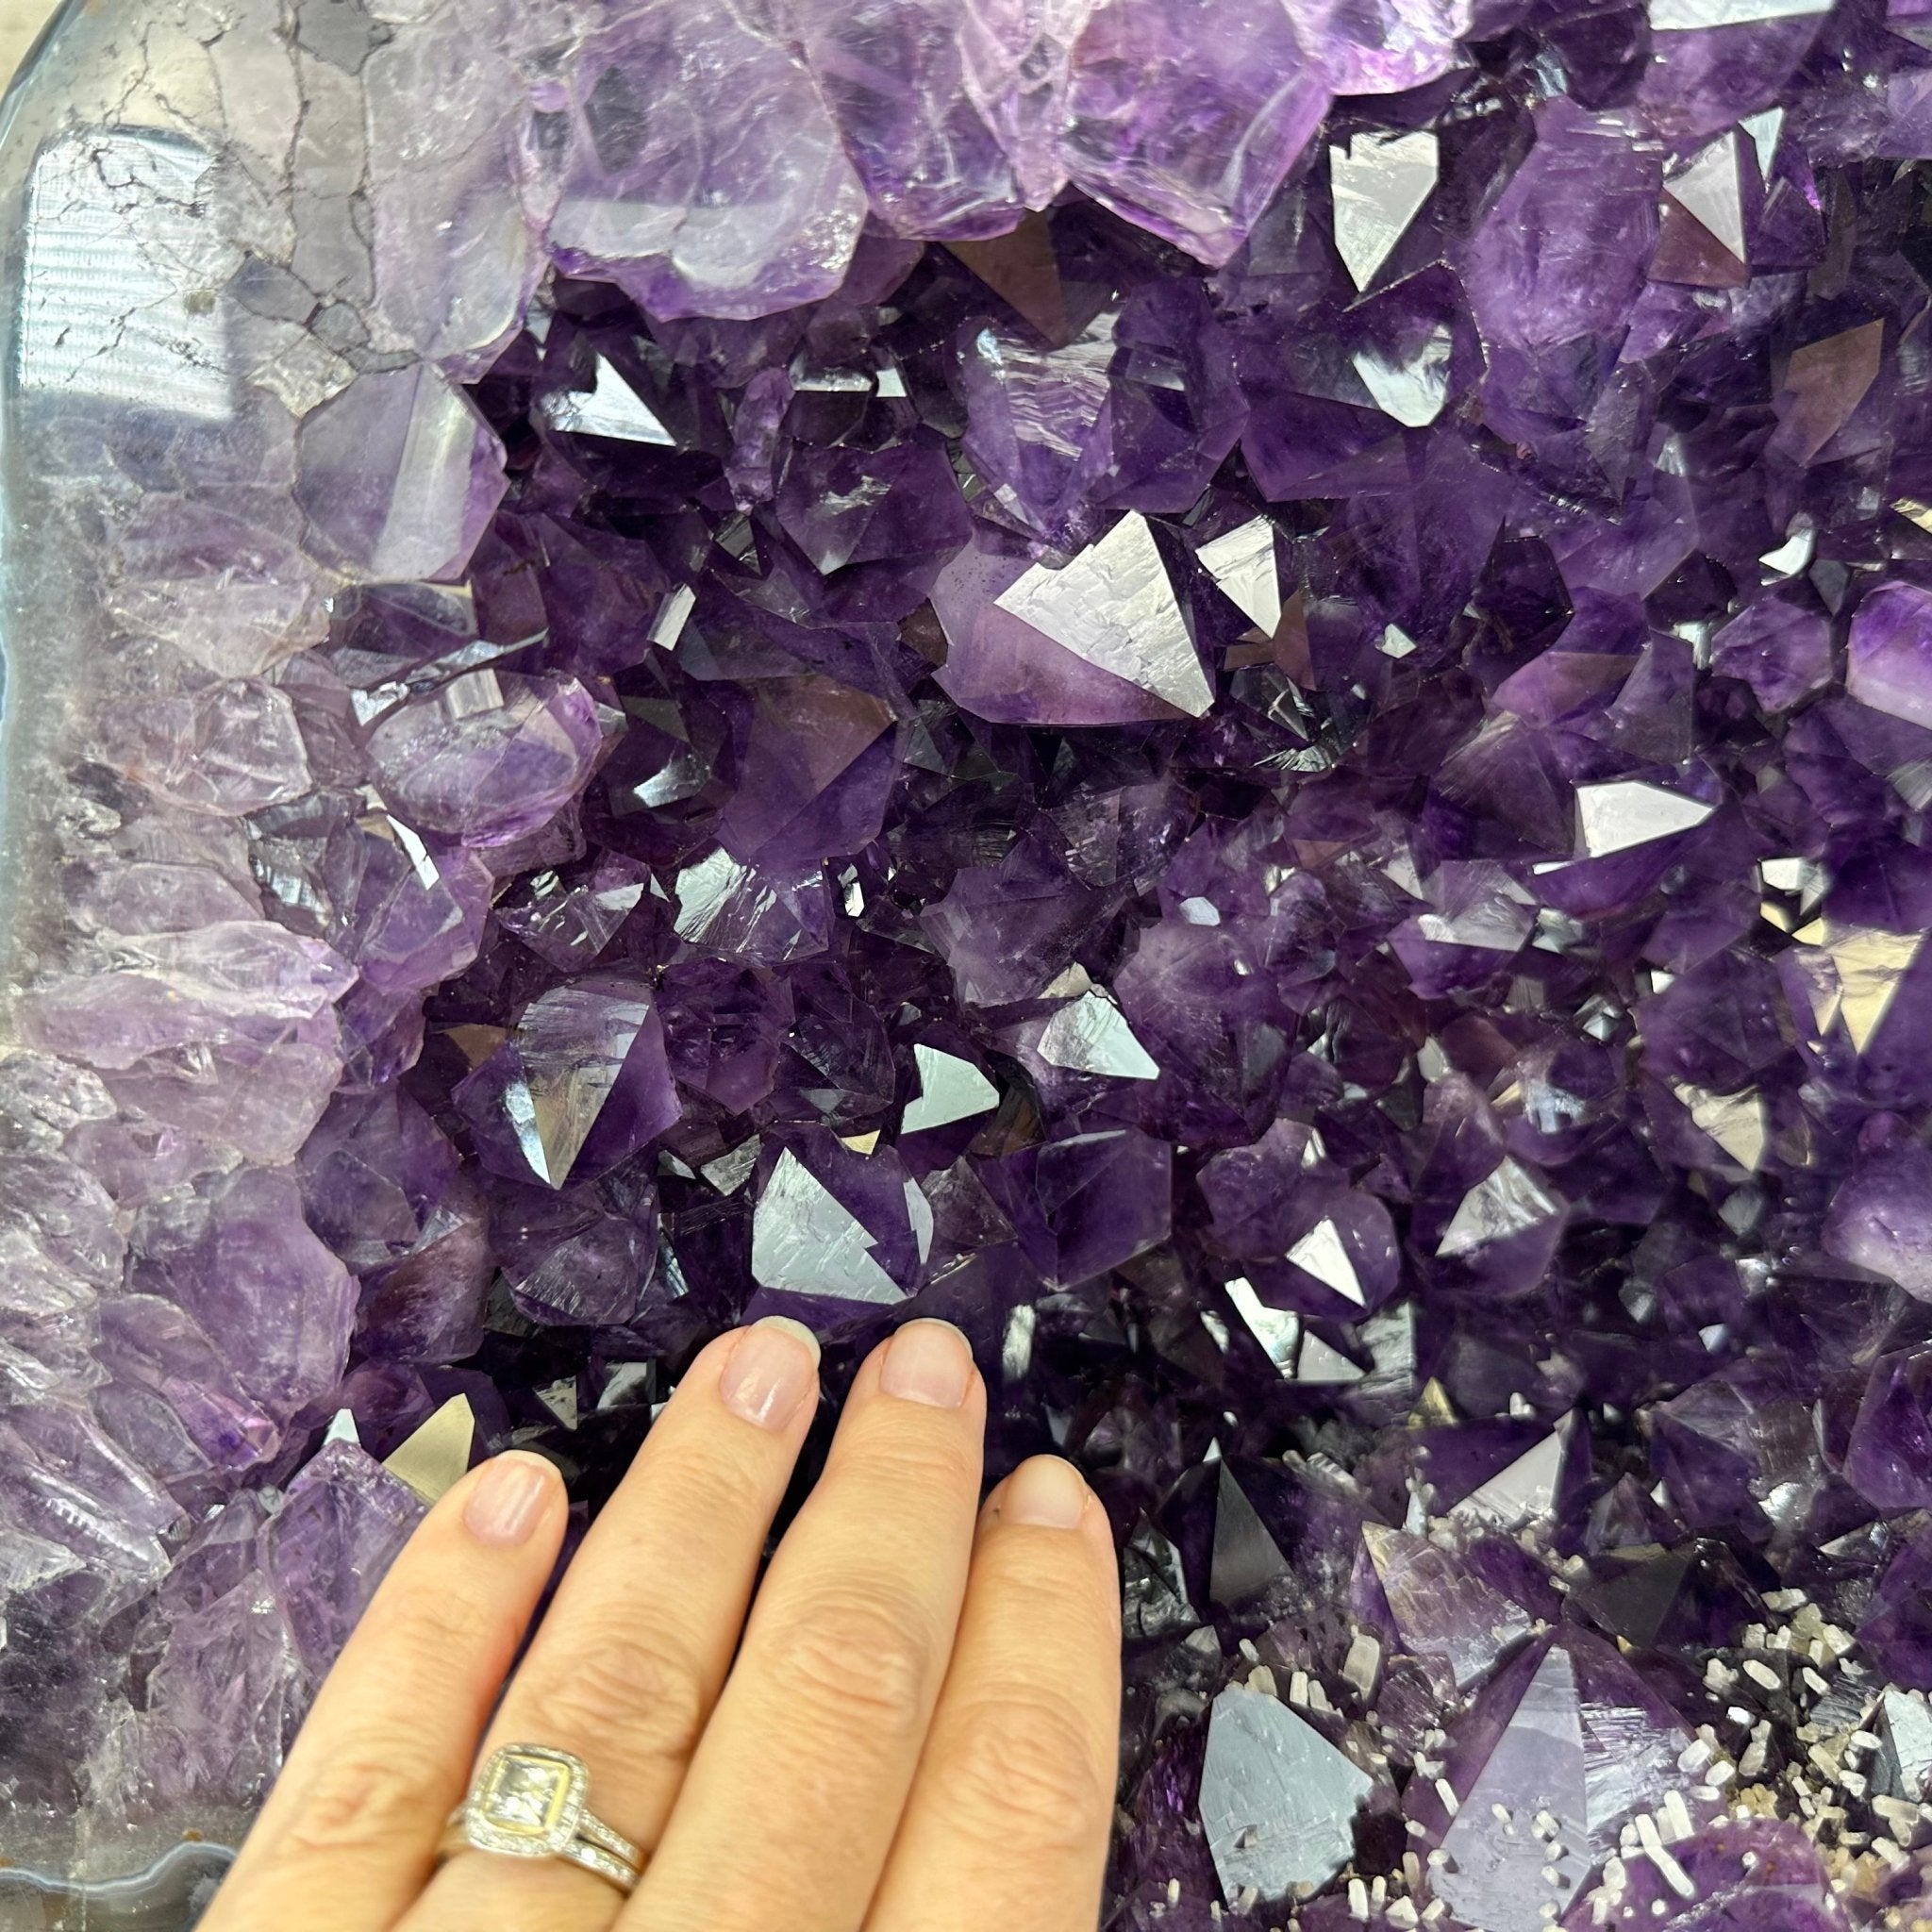 Super Quality Brazilian Amethyst Cathedral, 98.2 lbs & 17.4" Tall, Model #5601-1182 by Brazil Gems - Brazil GemsBrazil GemsSuper Quality Brazilian Amethyst Cathedral, 98.2 lbs & 17.4" Tall, Model #5601-1182 by Brazil GemsCathedrals5601-1182